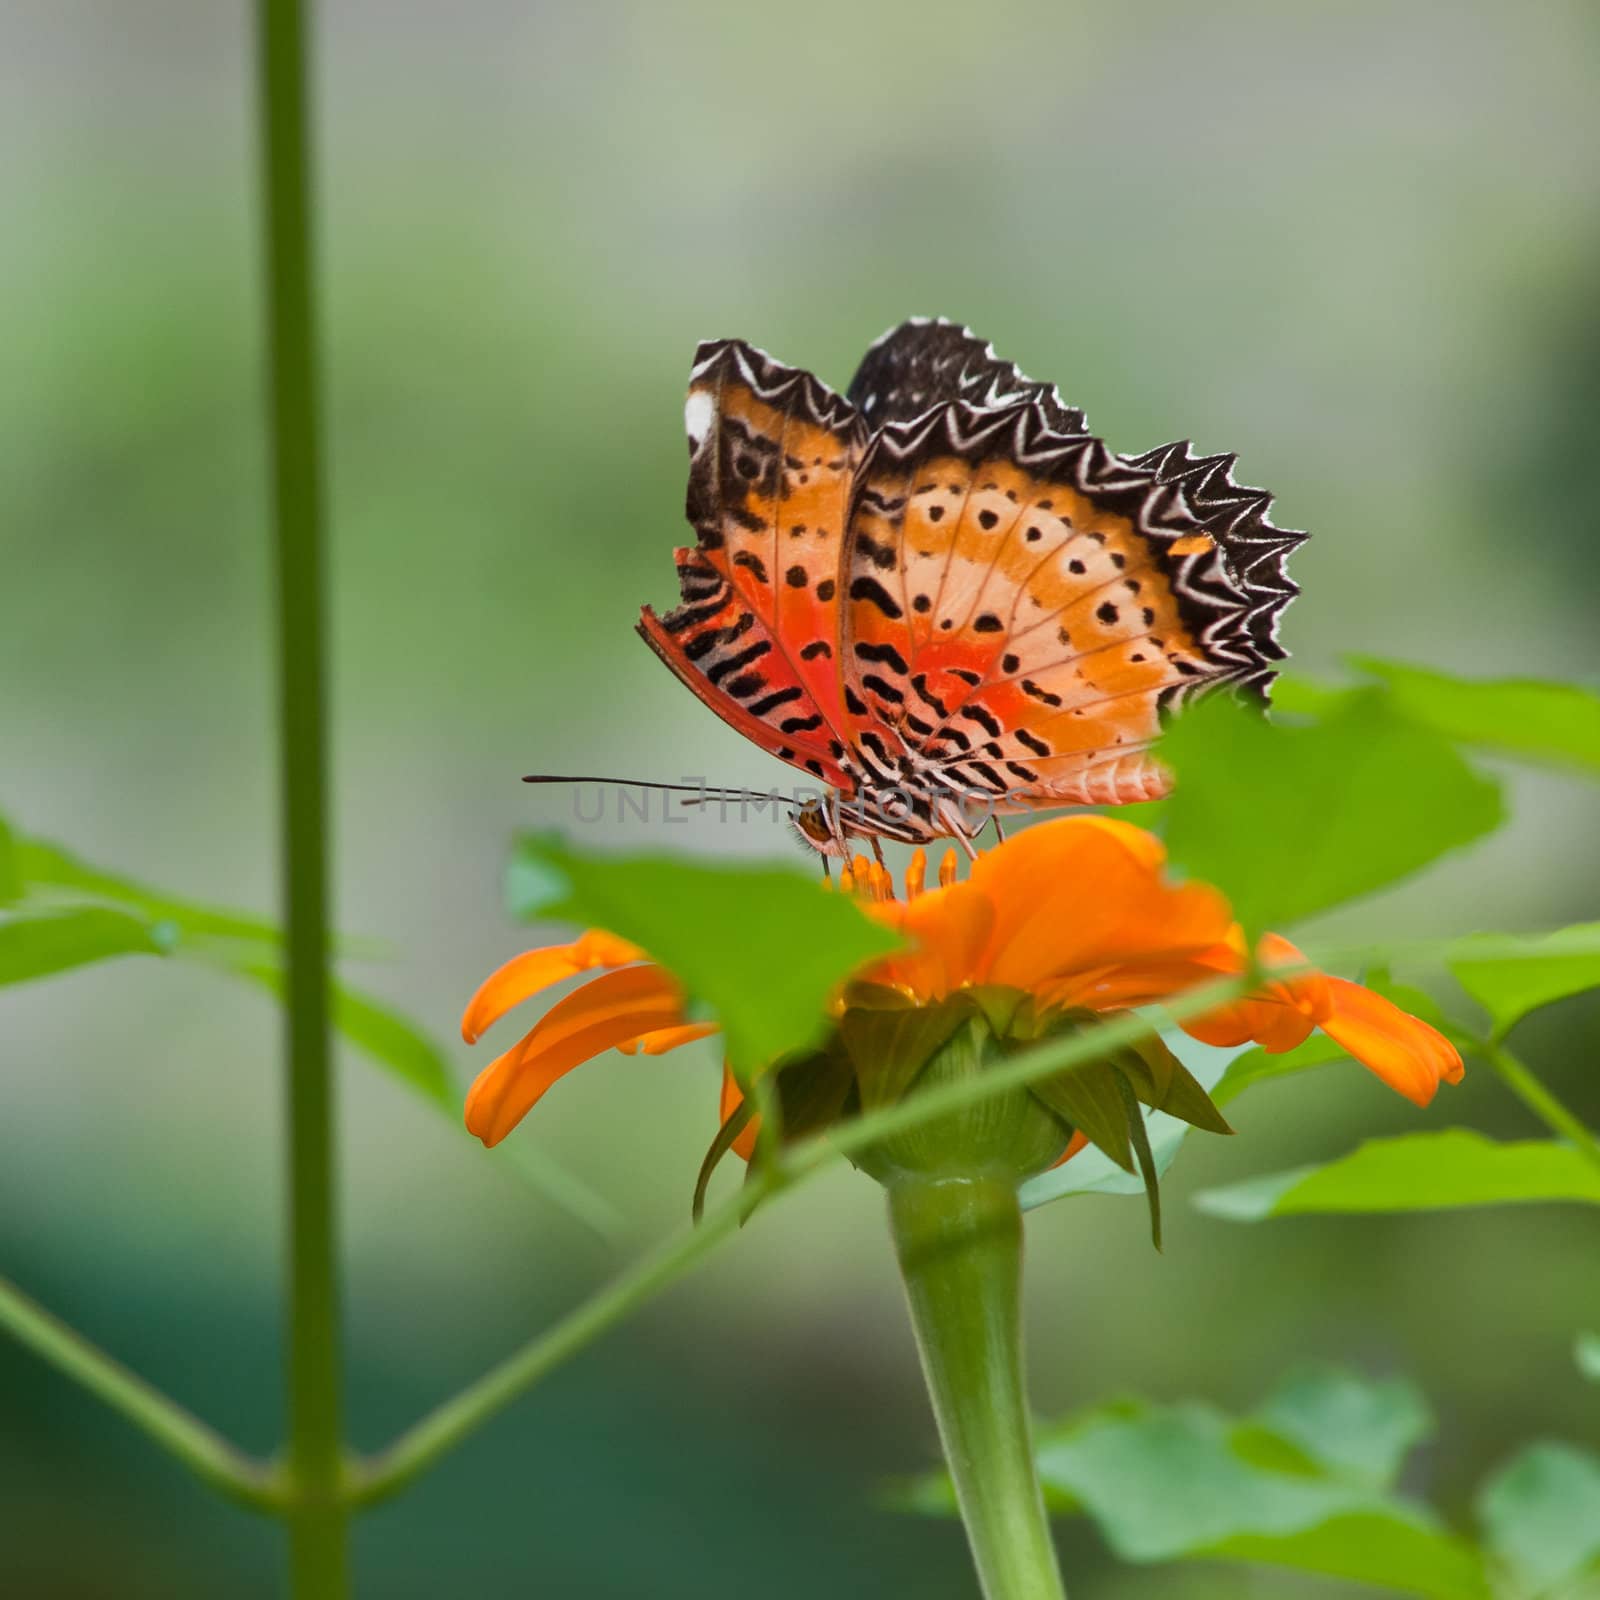 A beautiful butterfly sitting in the flower